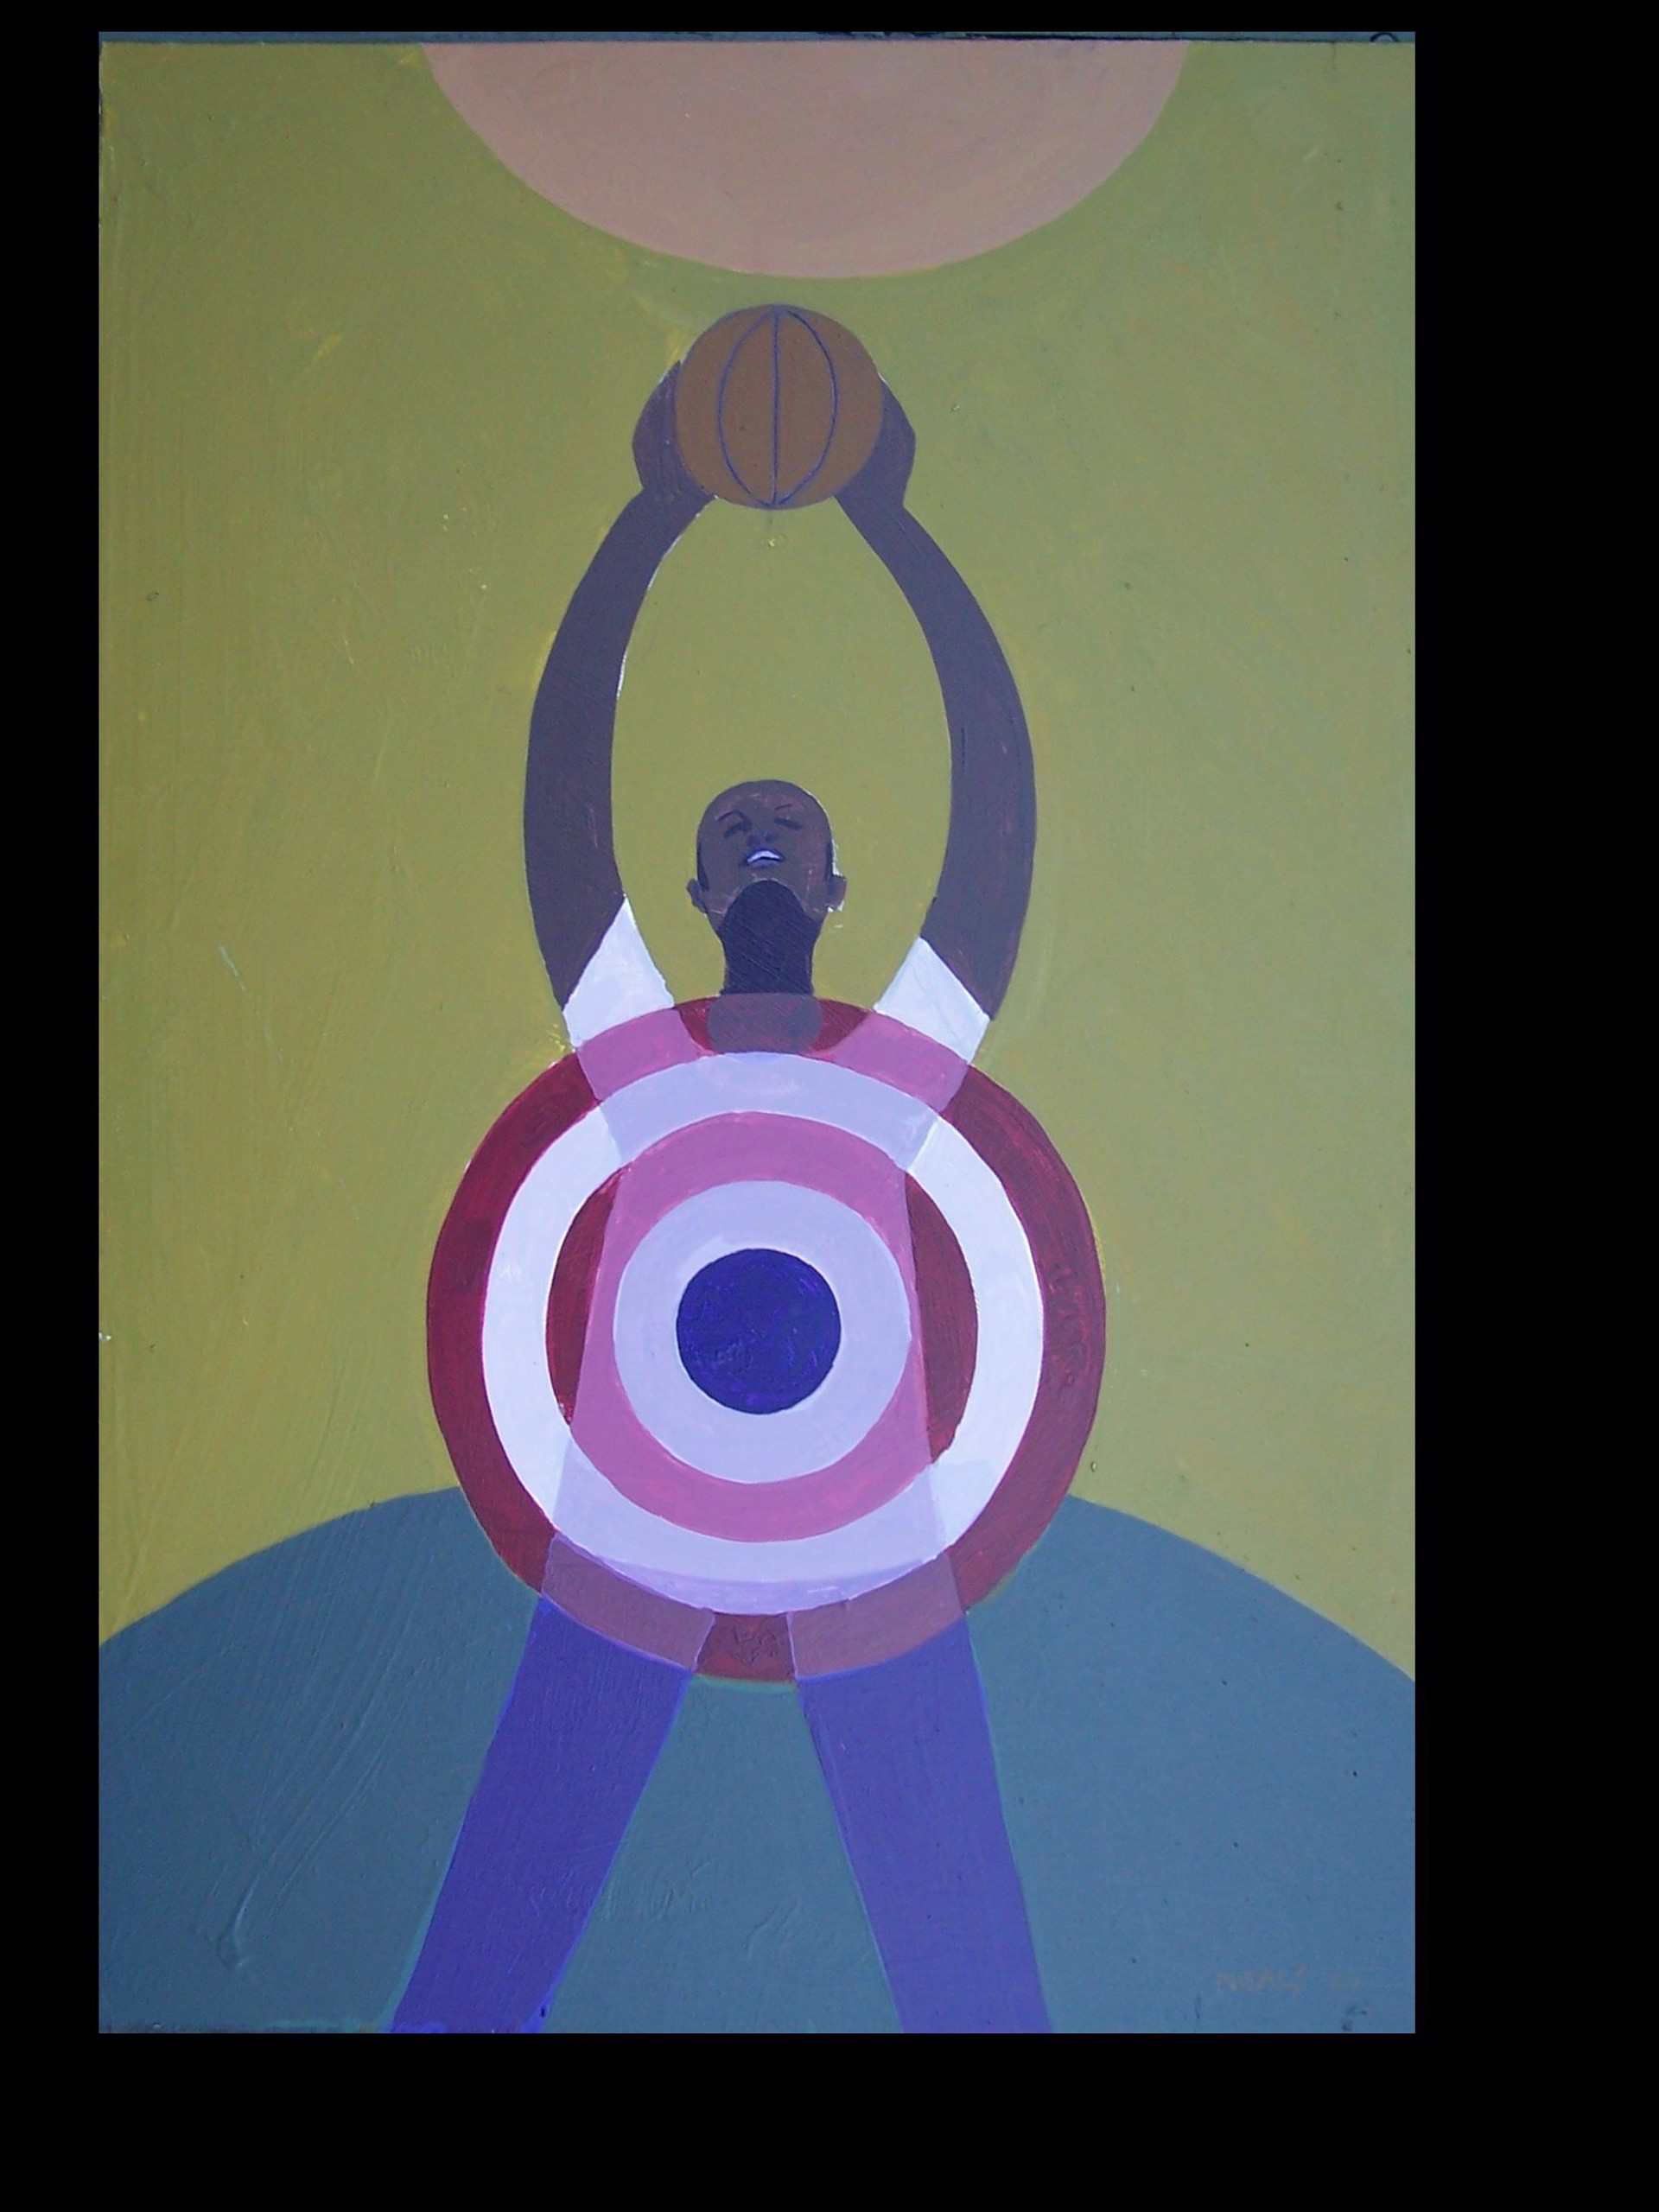 Hoops Target by Otto Neals